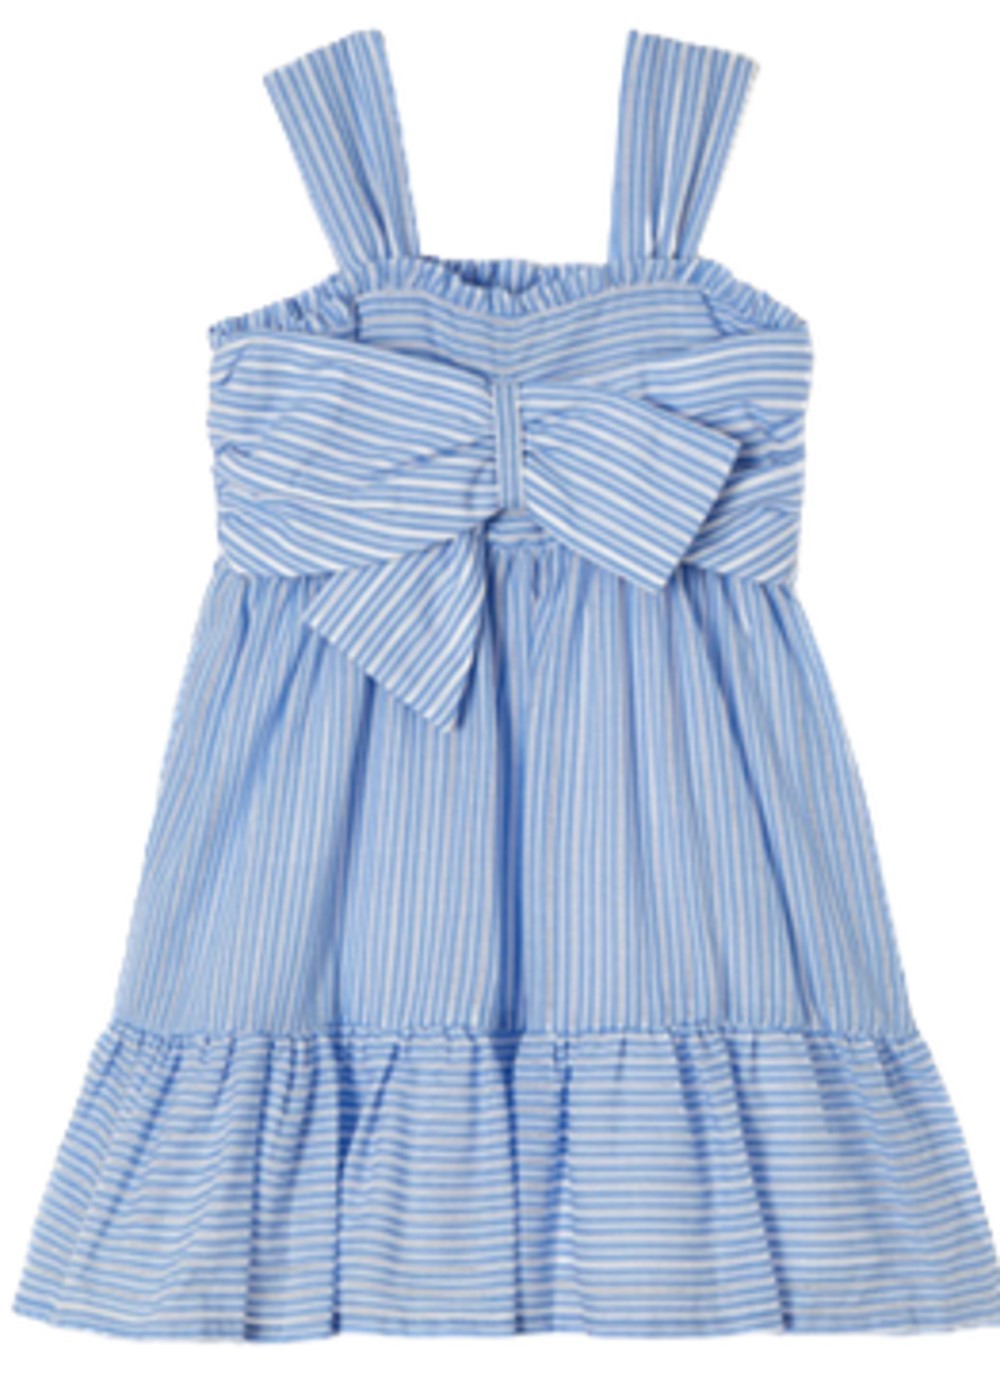 MAYORAL 3938 GIRLS BLUE AND WHITE STRIPED DRESS